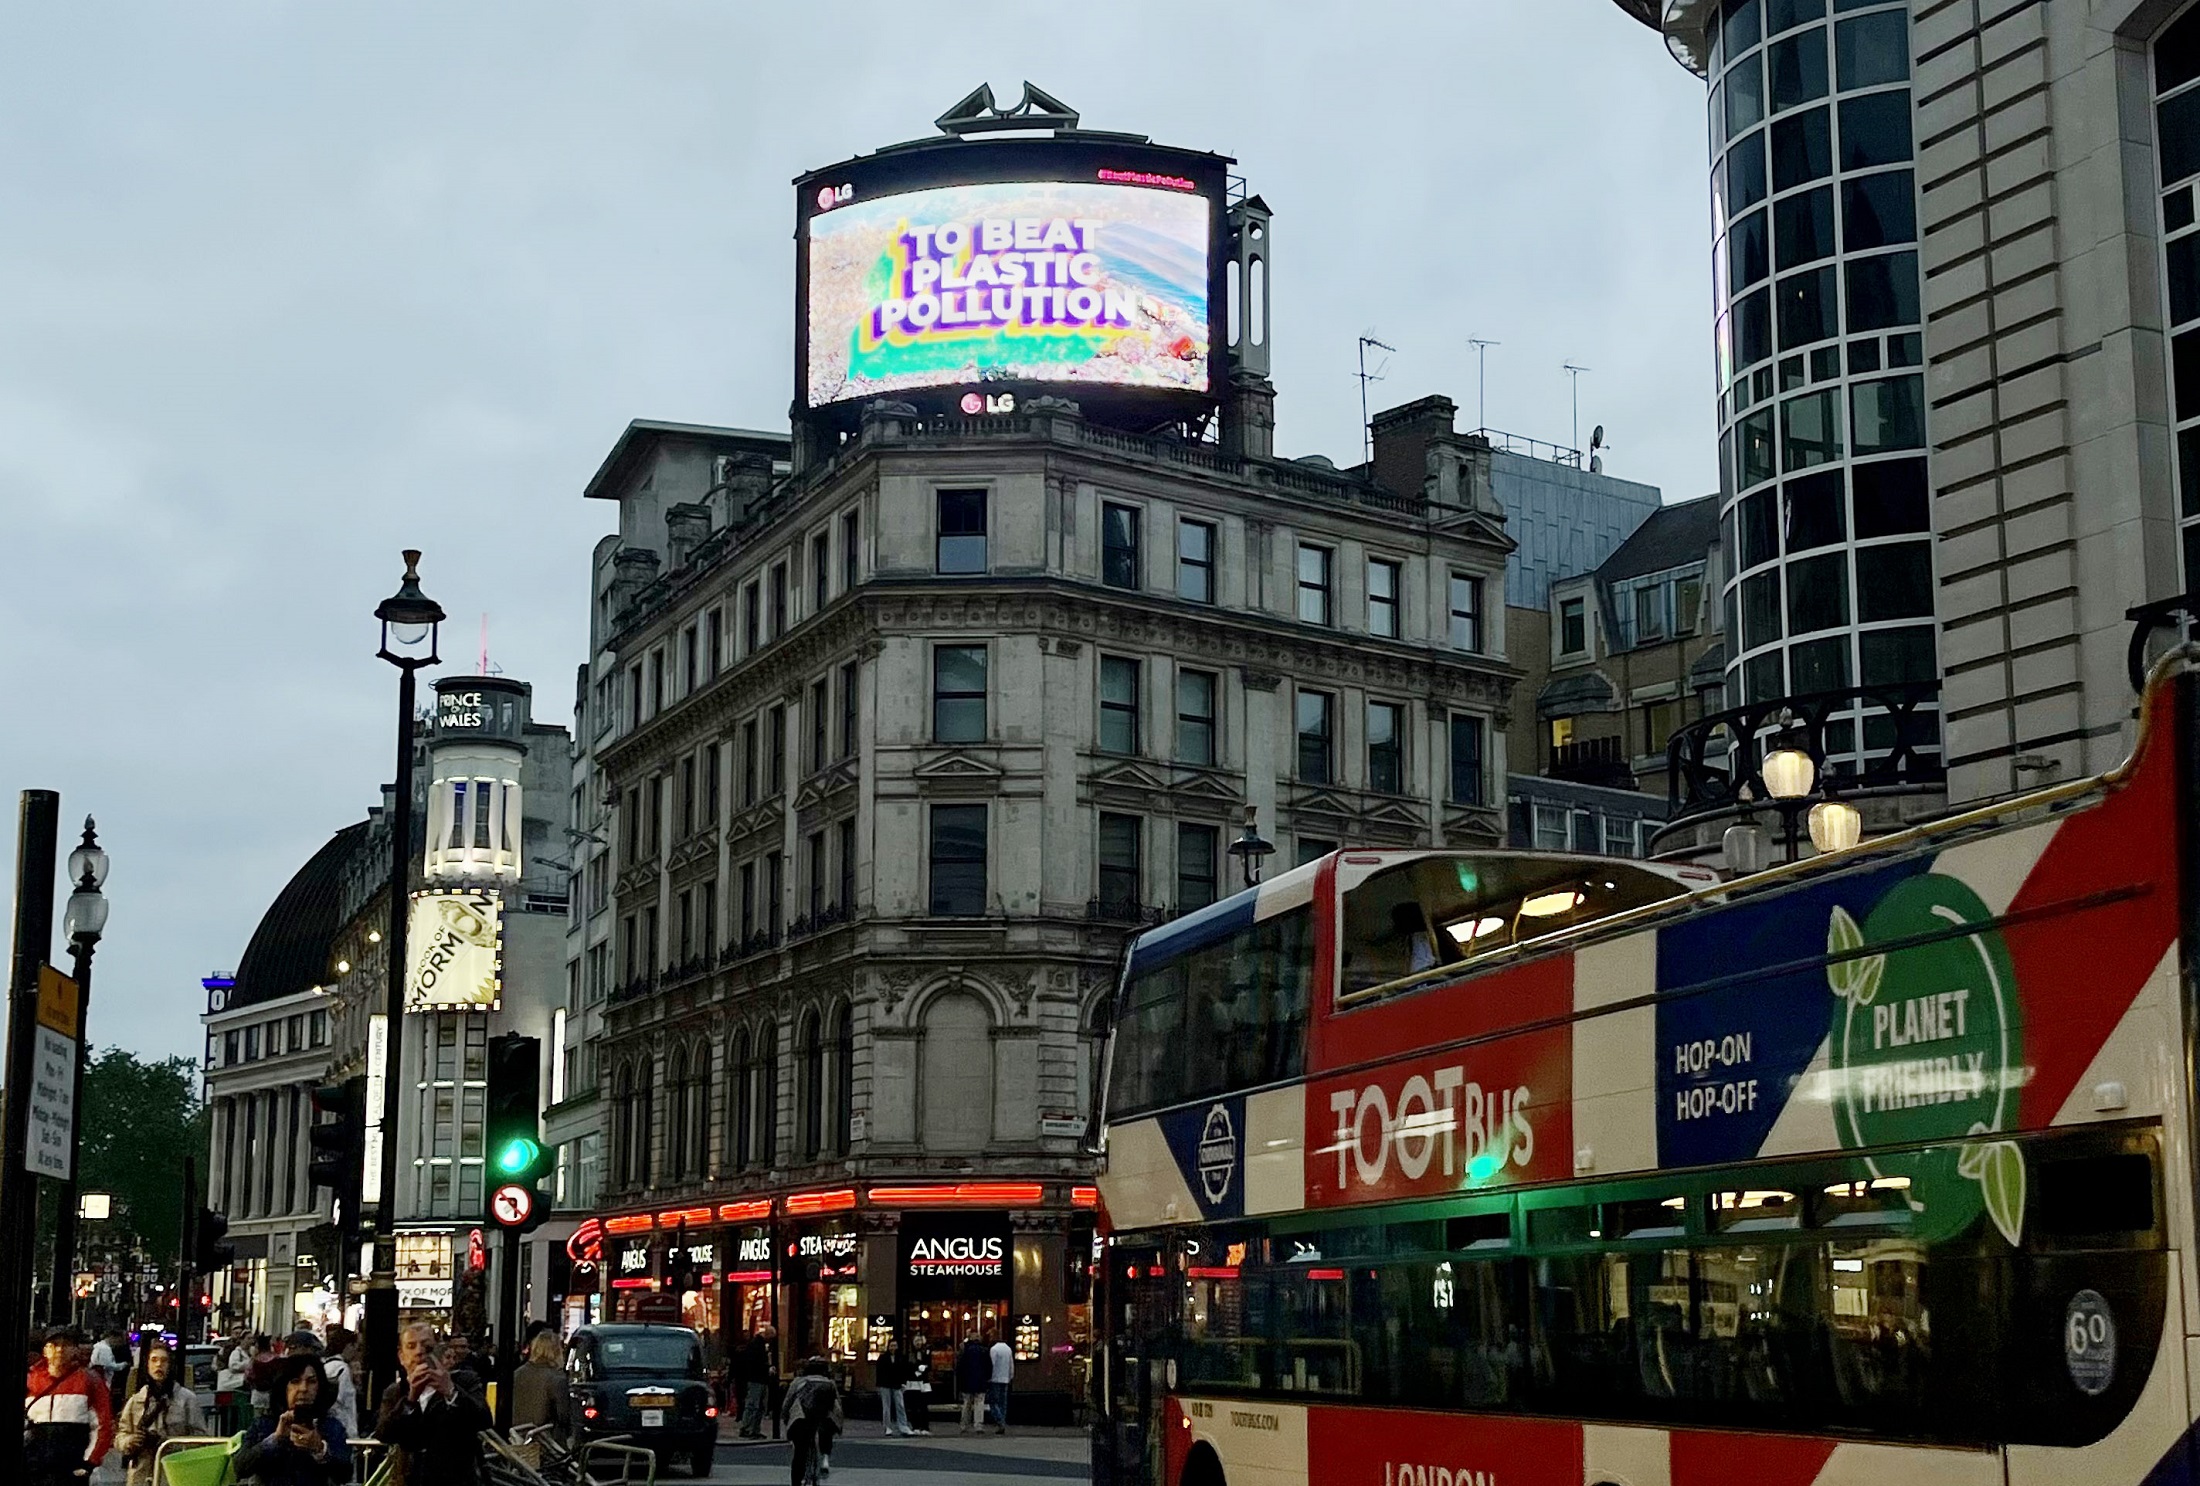 A video highlighting LG's commitment to convert to 100 percent renewable energy displayed on a digital billboard at London’s famed Piccadilly Circus